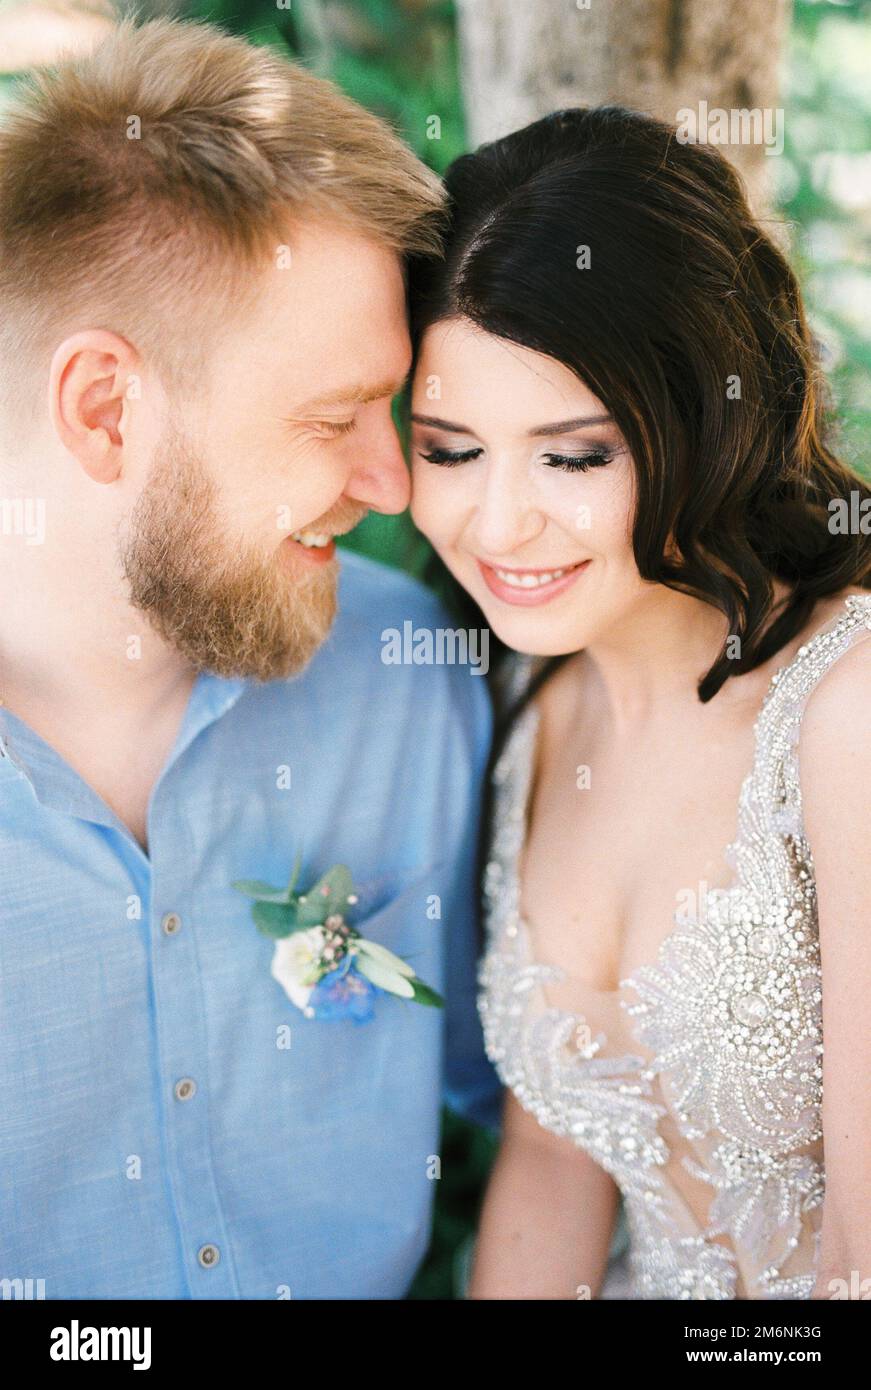 Bride and groom touch their foreheads to each other. Portrait Stock Photo